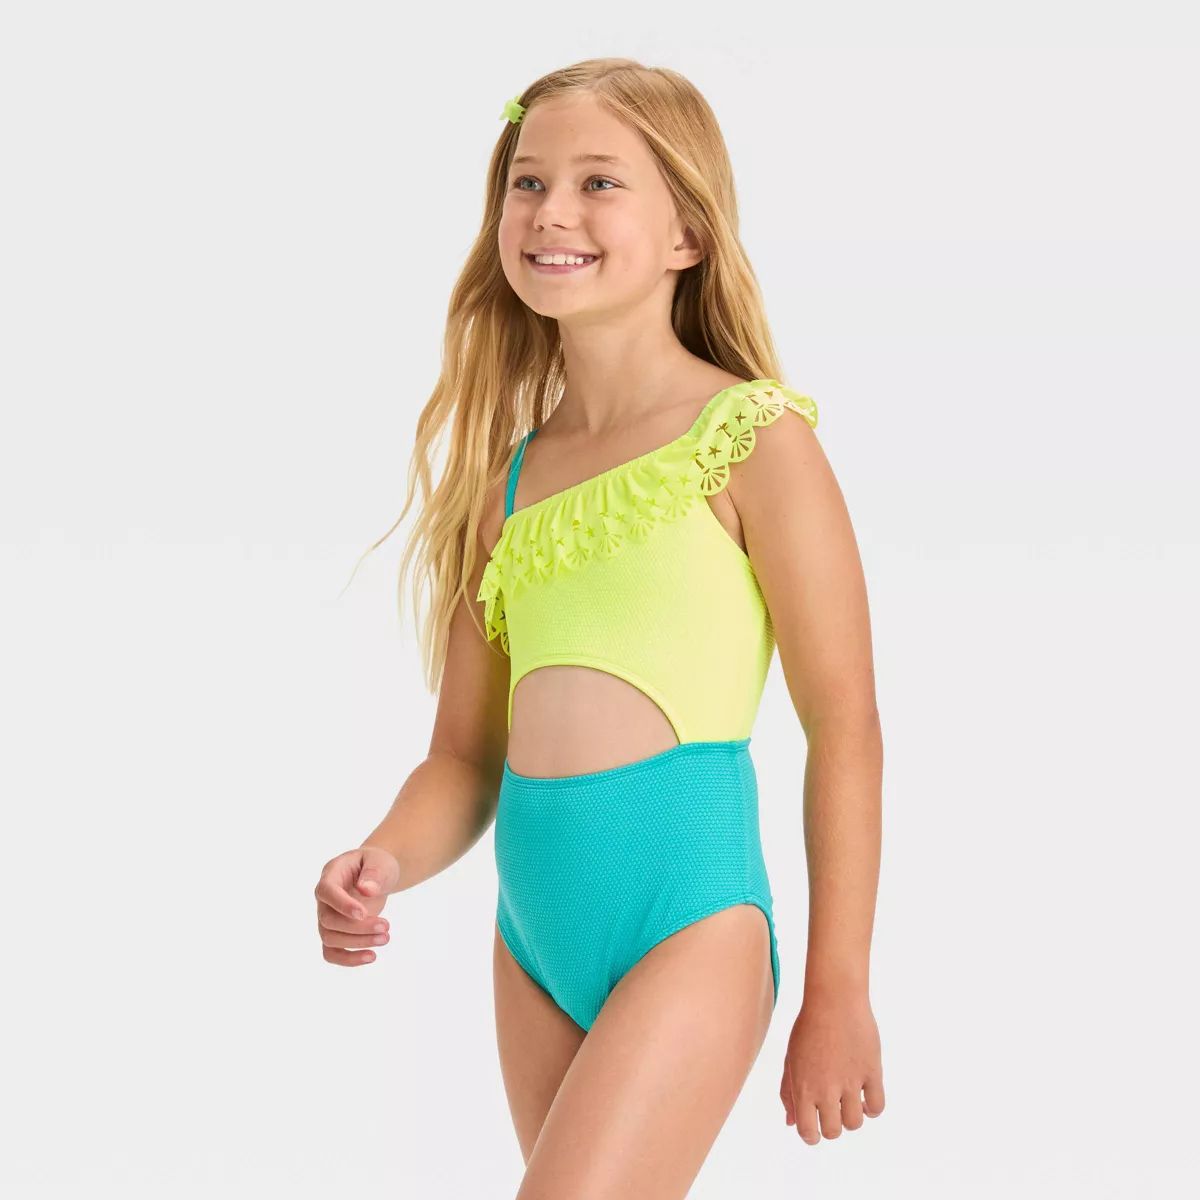 Girls' 'Beach Dreams' Solid One Piece Swimsuit - Cat & Jack™ Yellow/Light Blue | Target